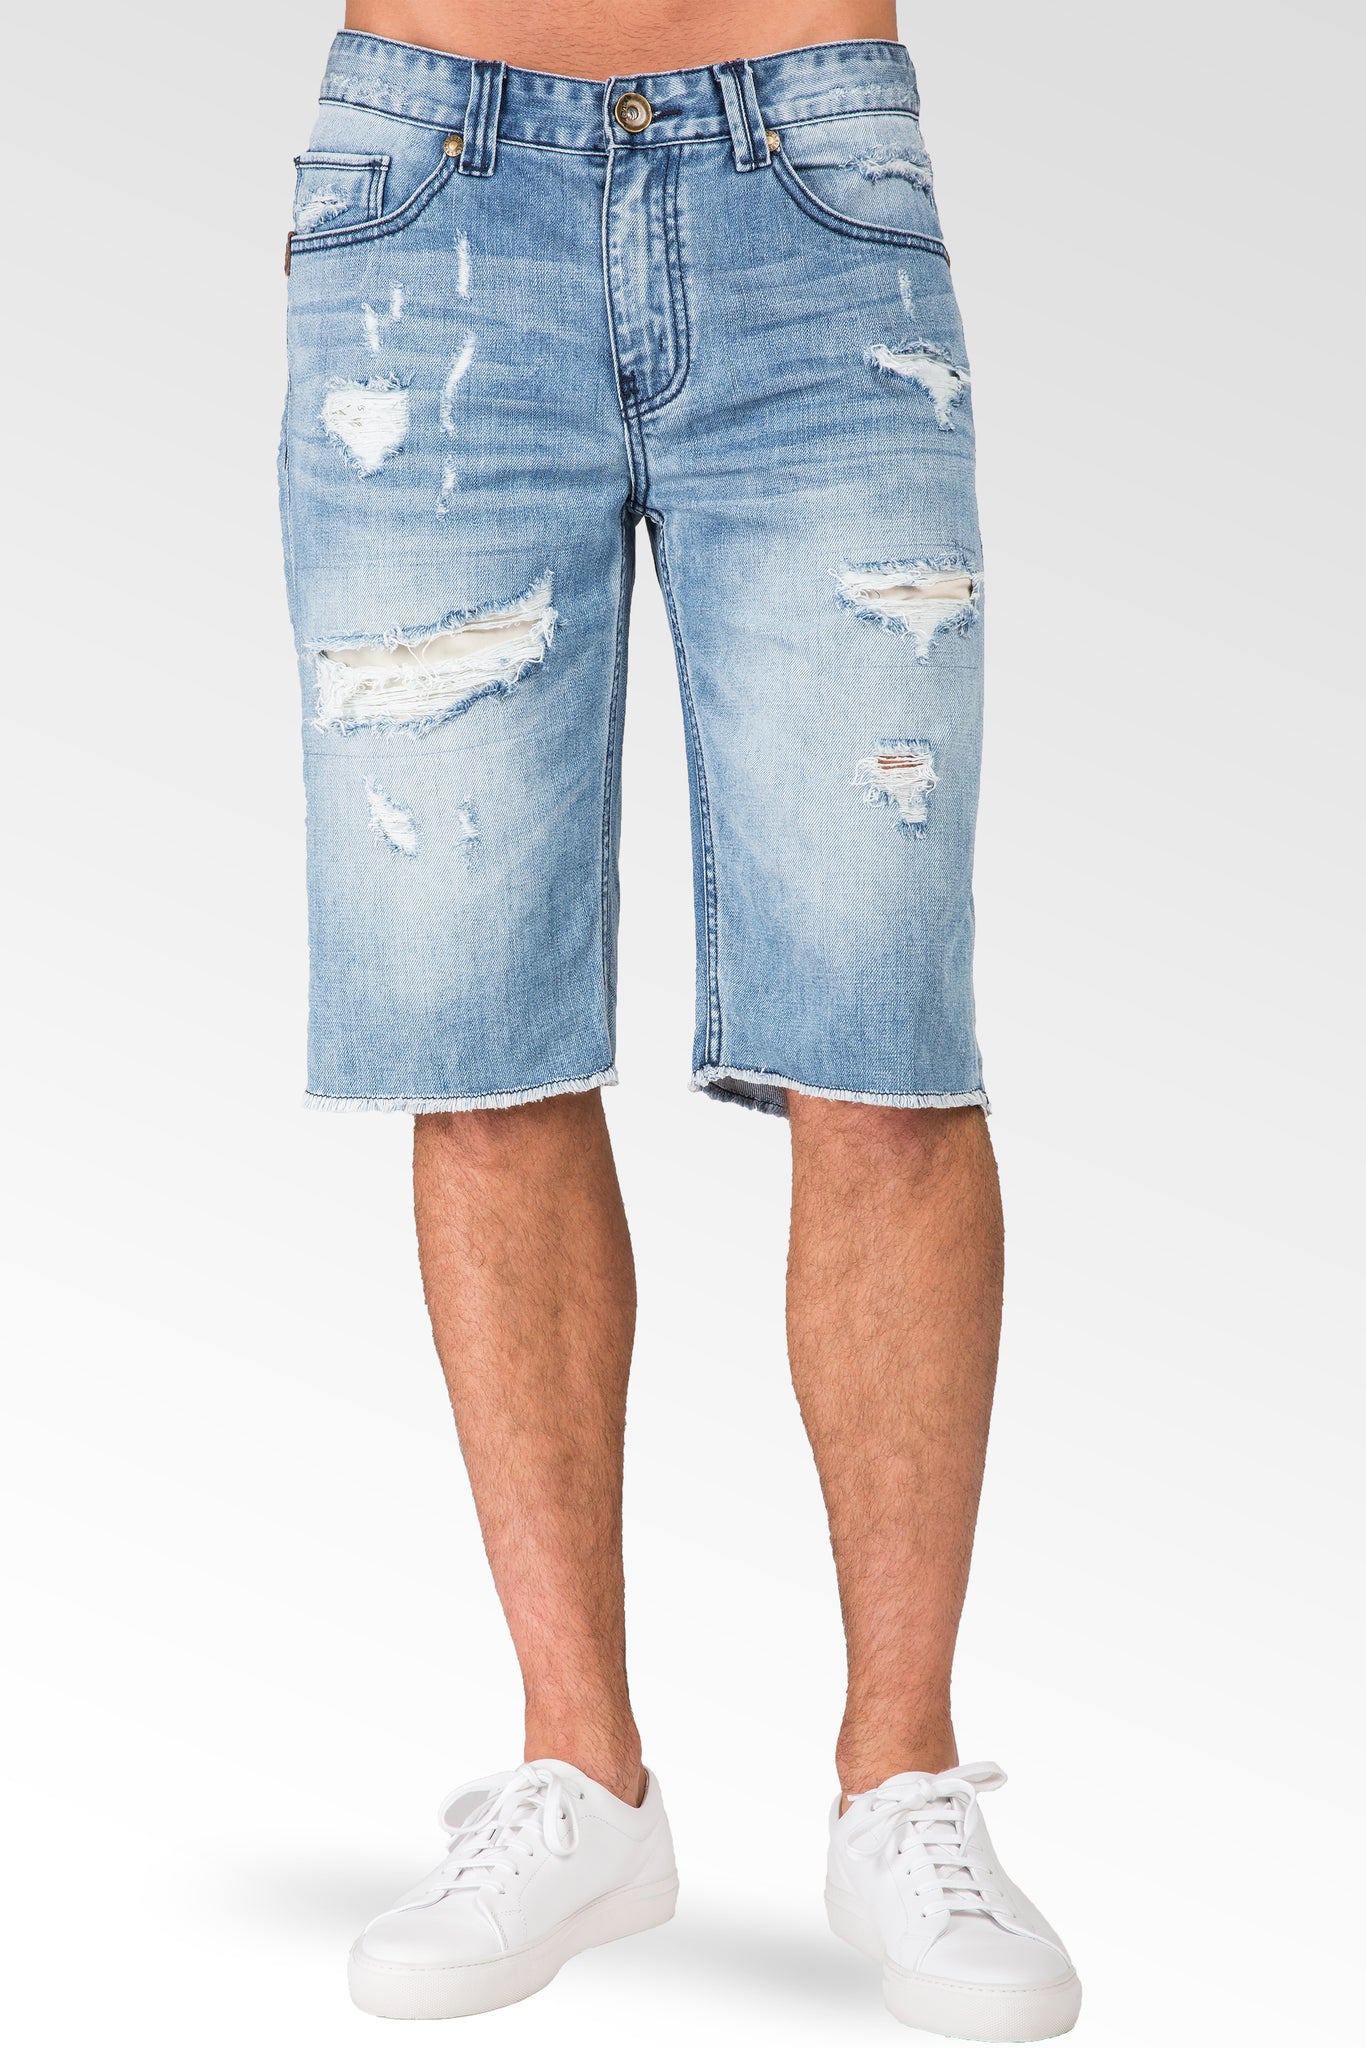 Light Sanded Blue Relaxed Premium Denim Cut Off Shorts Distressed Mended Raw Edge